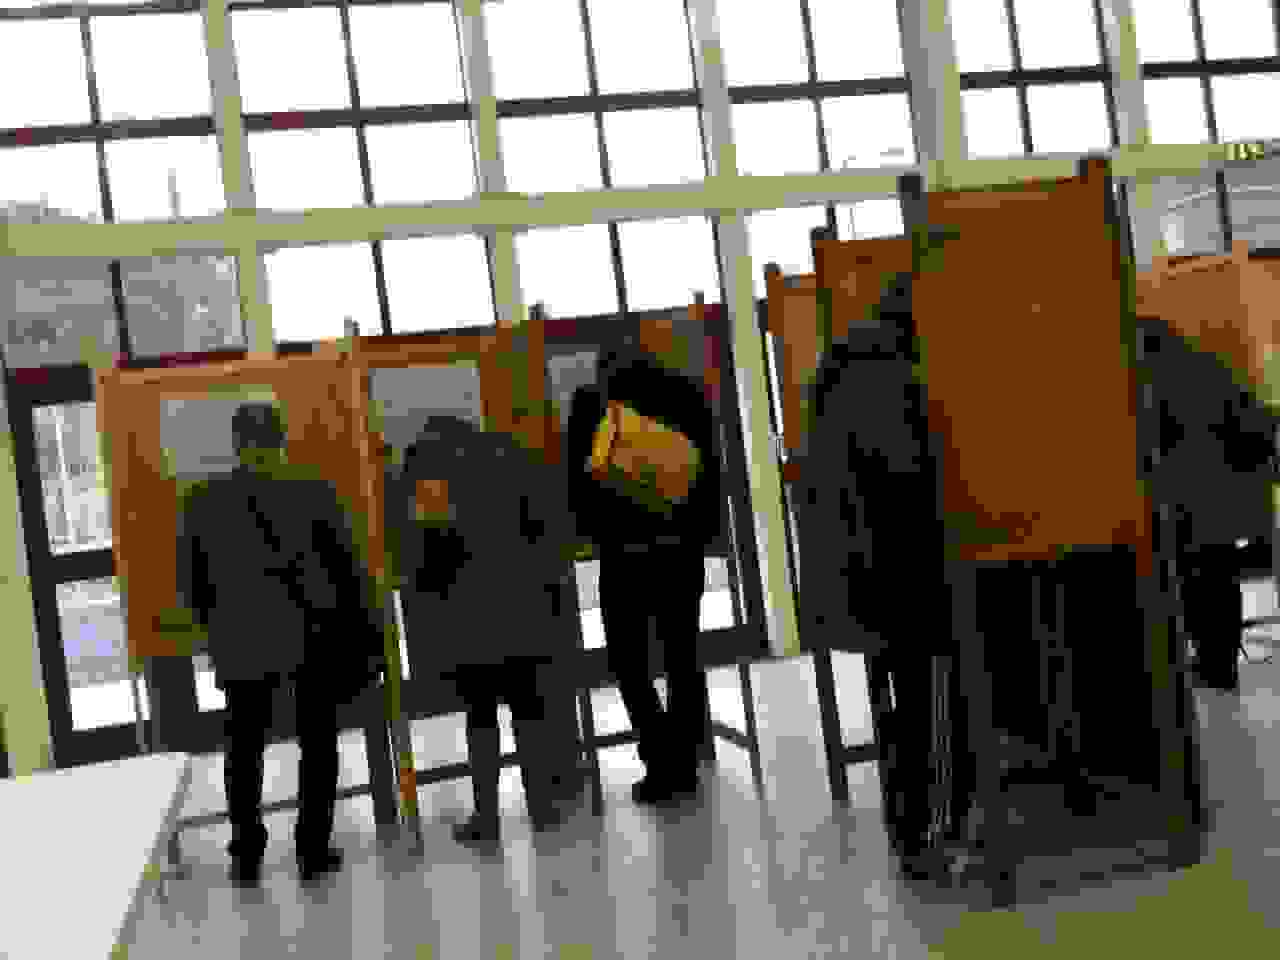 Voters in a polling station. ©Alex Lee, Flickr, licensed under the Creative Commons Attribution 2.0 Generic license